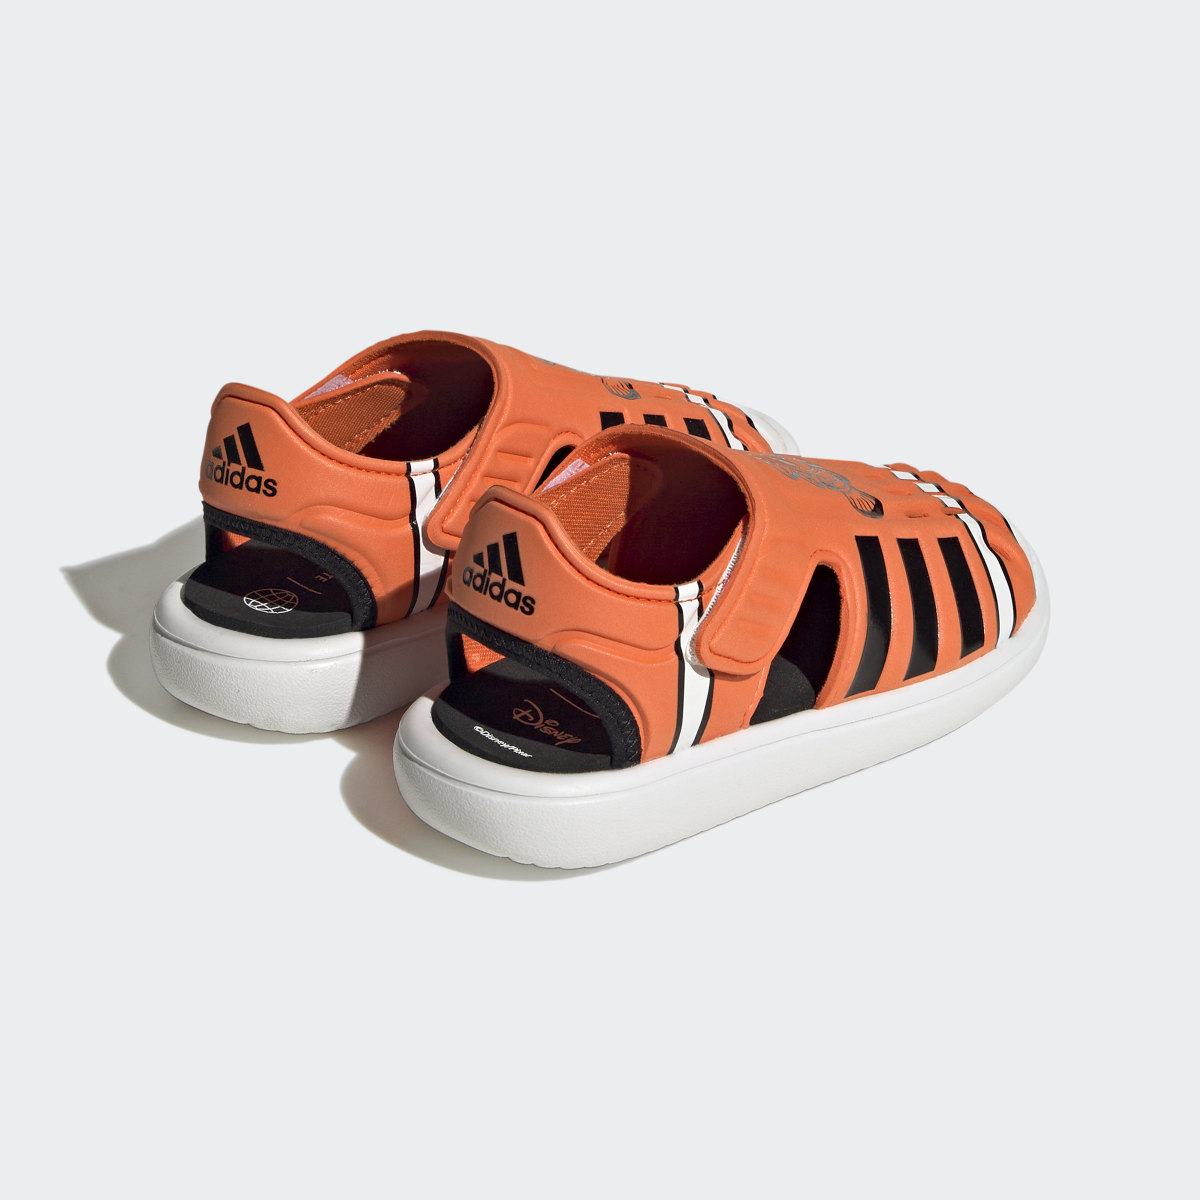 Adidas Finding Nemo and Dory Closed Toe Summer Sandals. 6